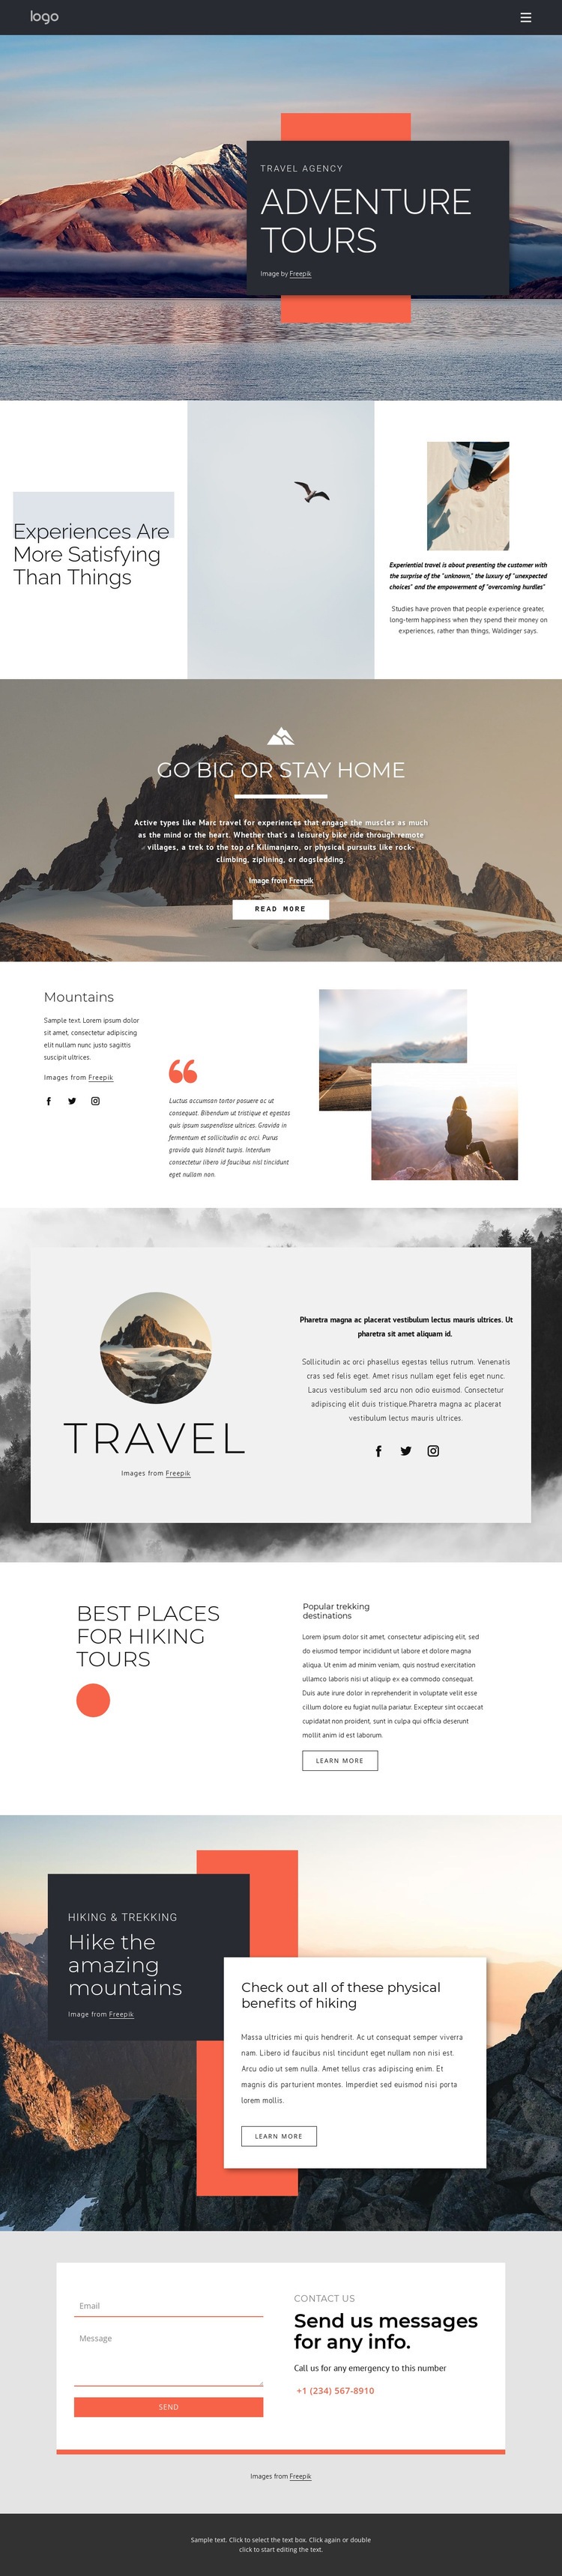 We provide hiking tours Wix Template Alternative